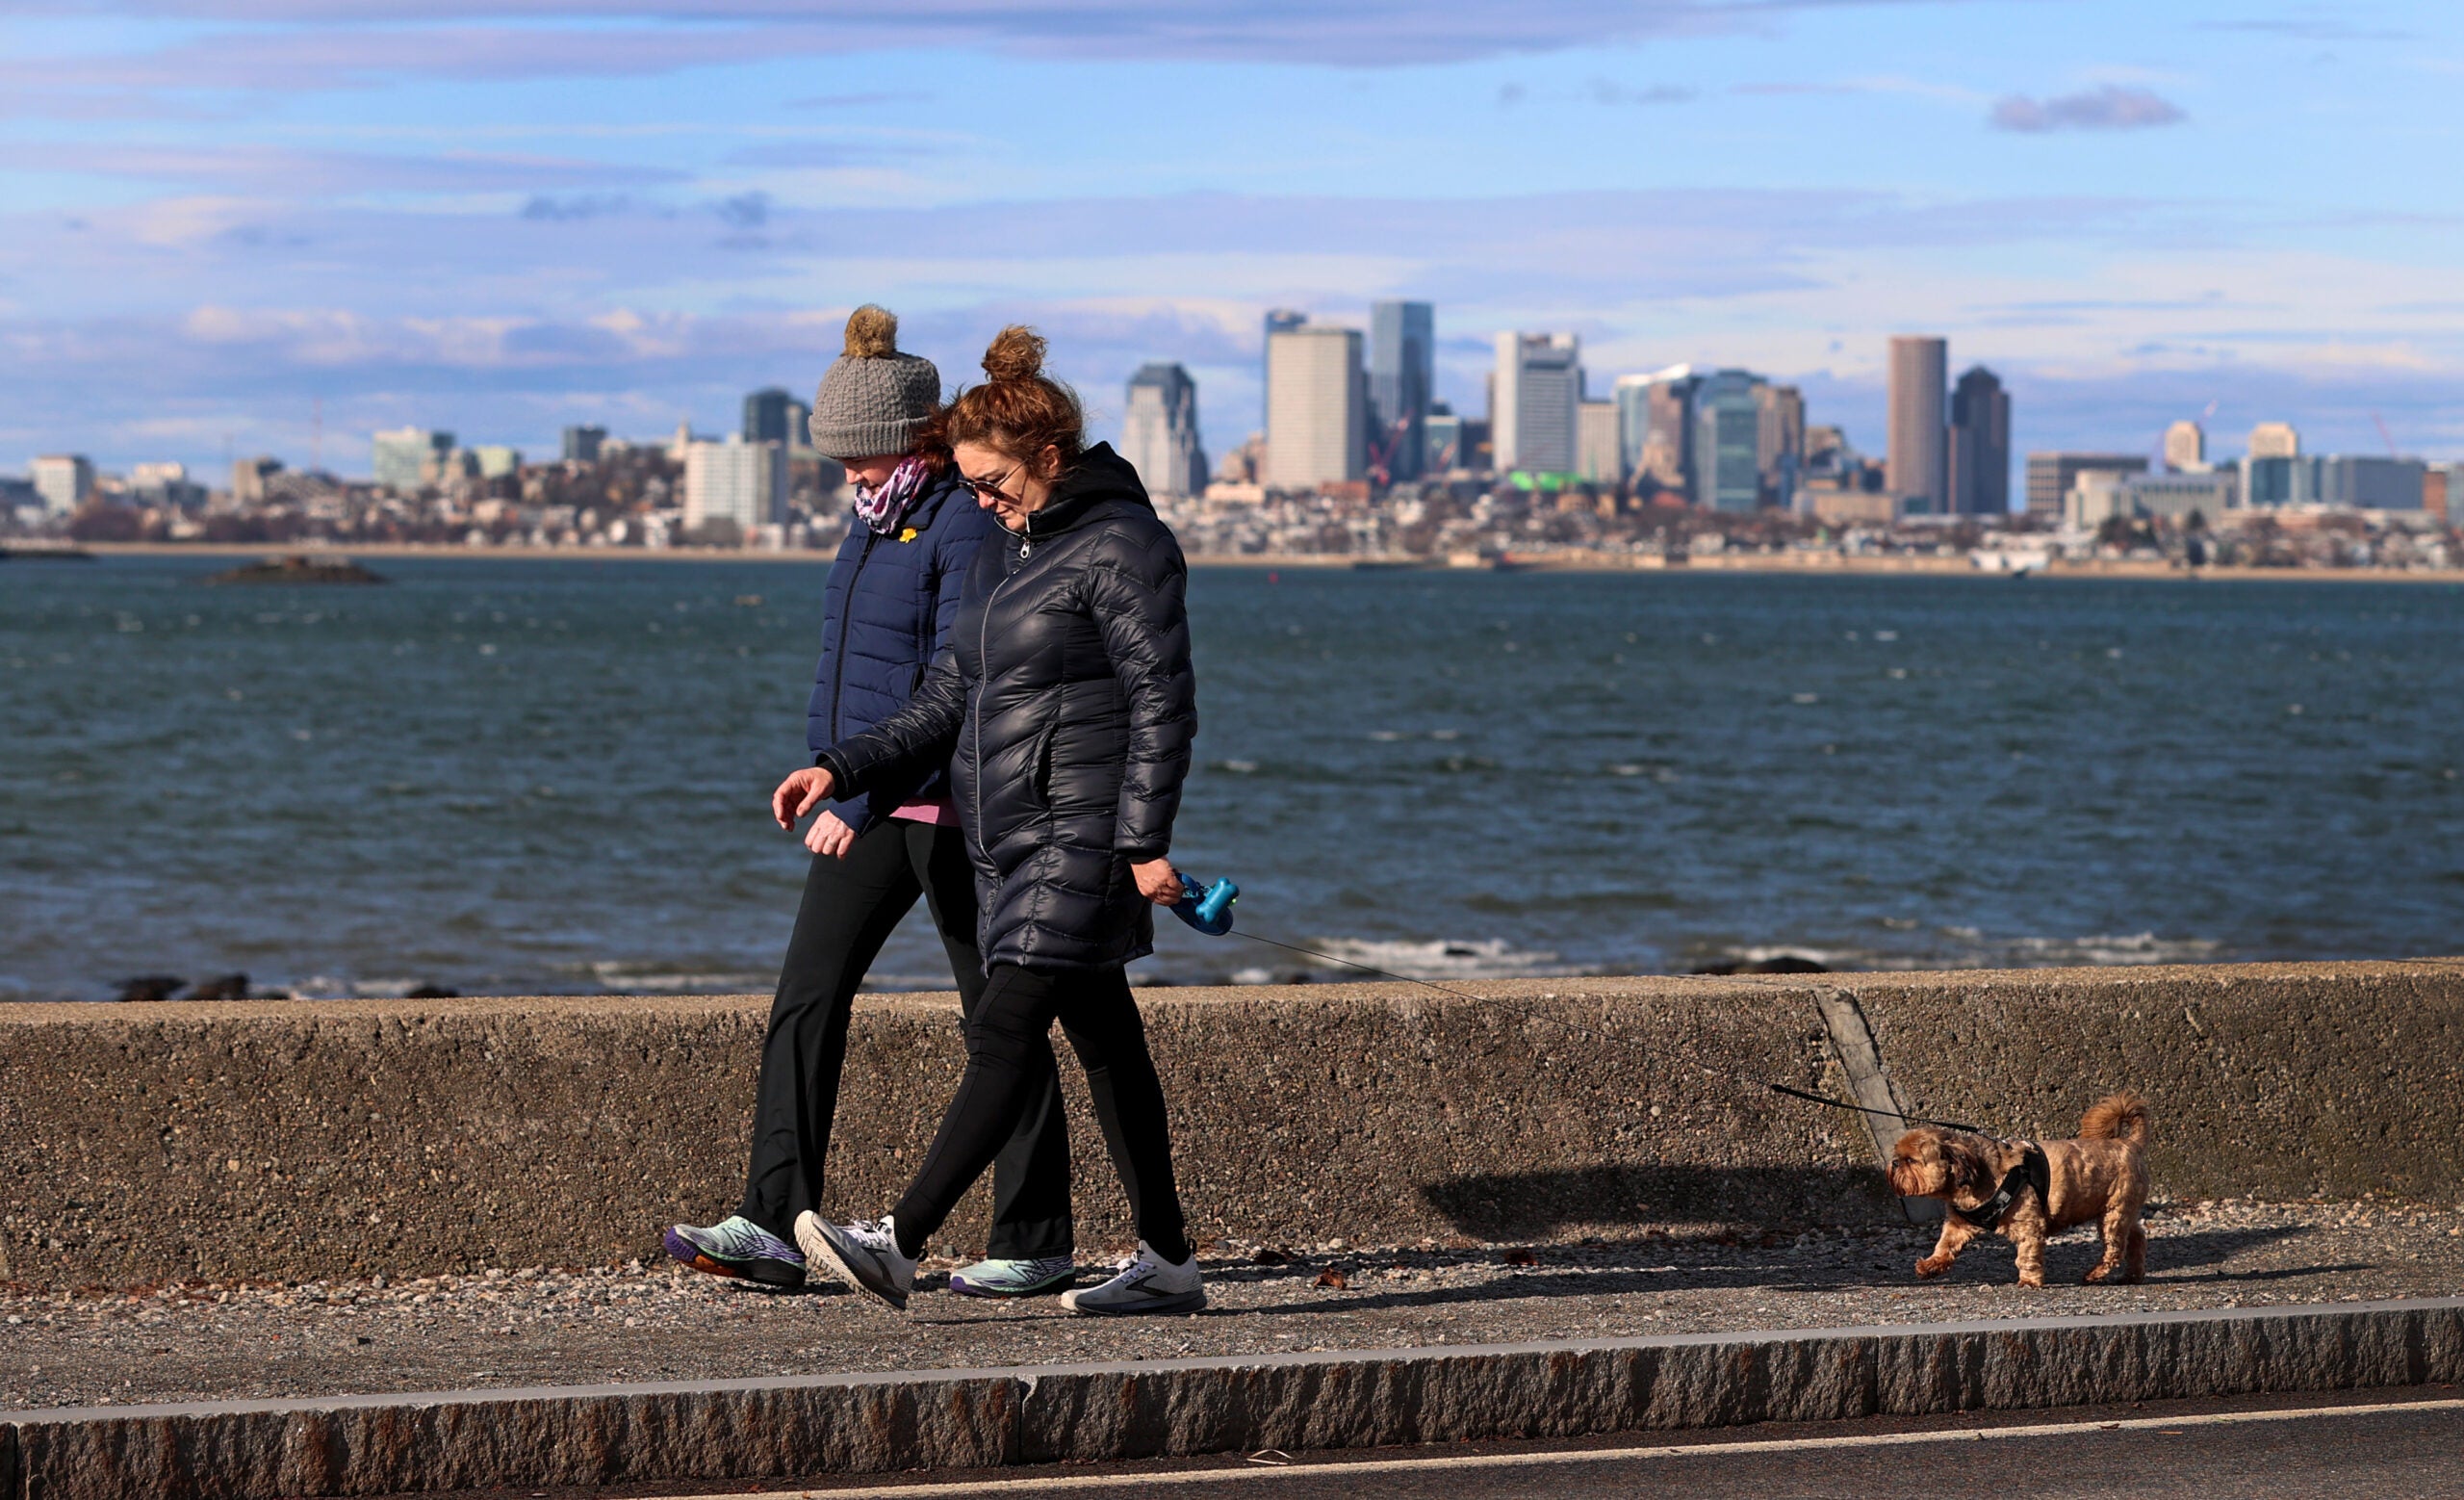 People go for a brisk winter walk with a dog along a breakwater in Squantum with Boston in the background.